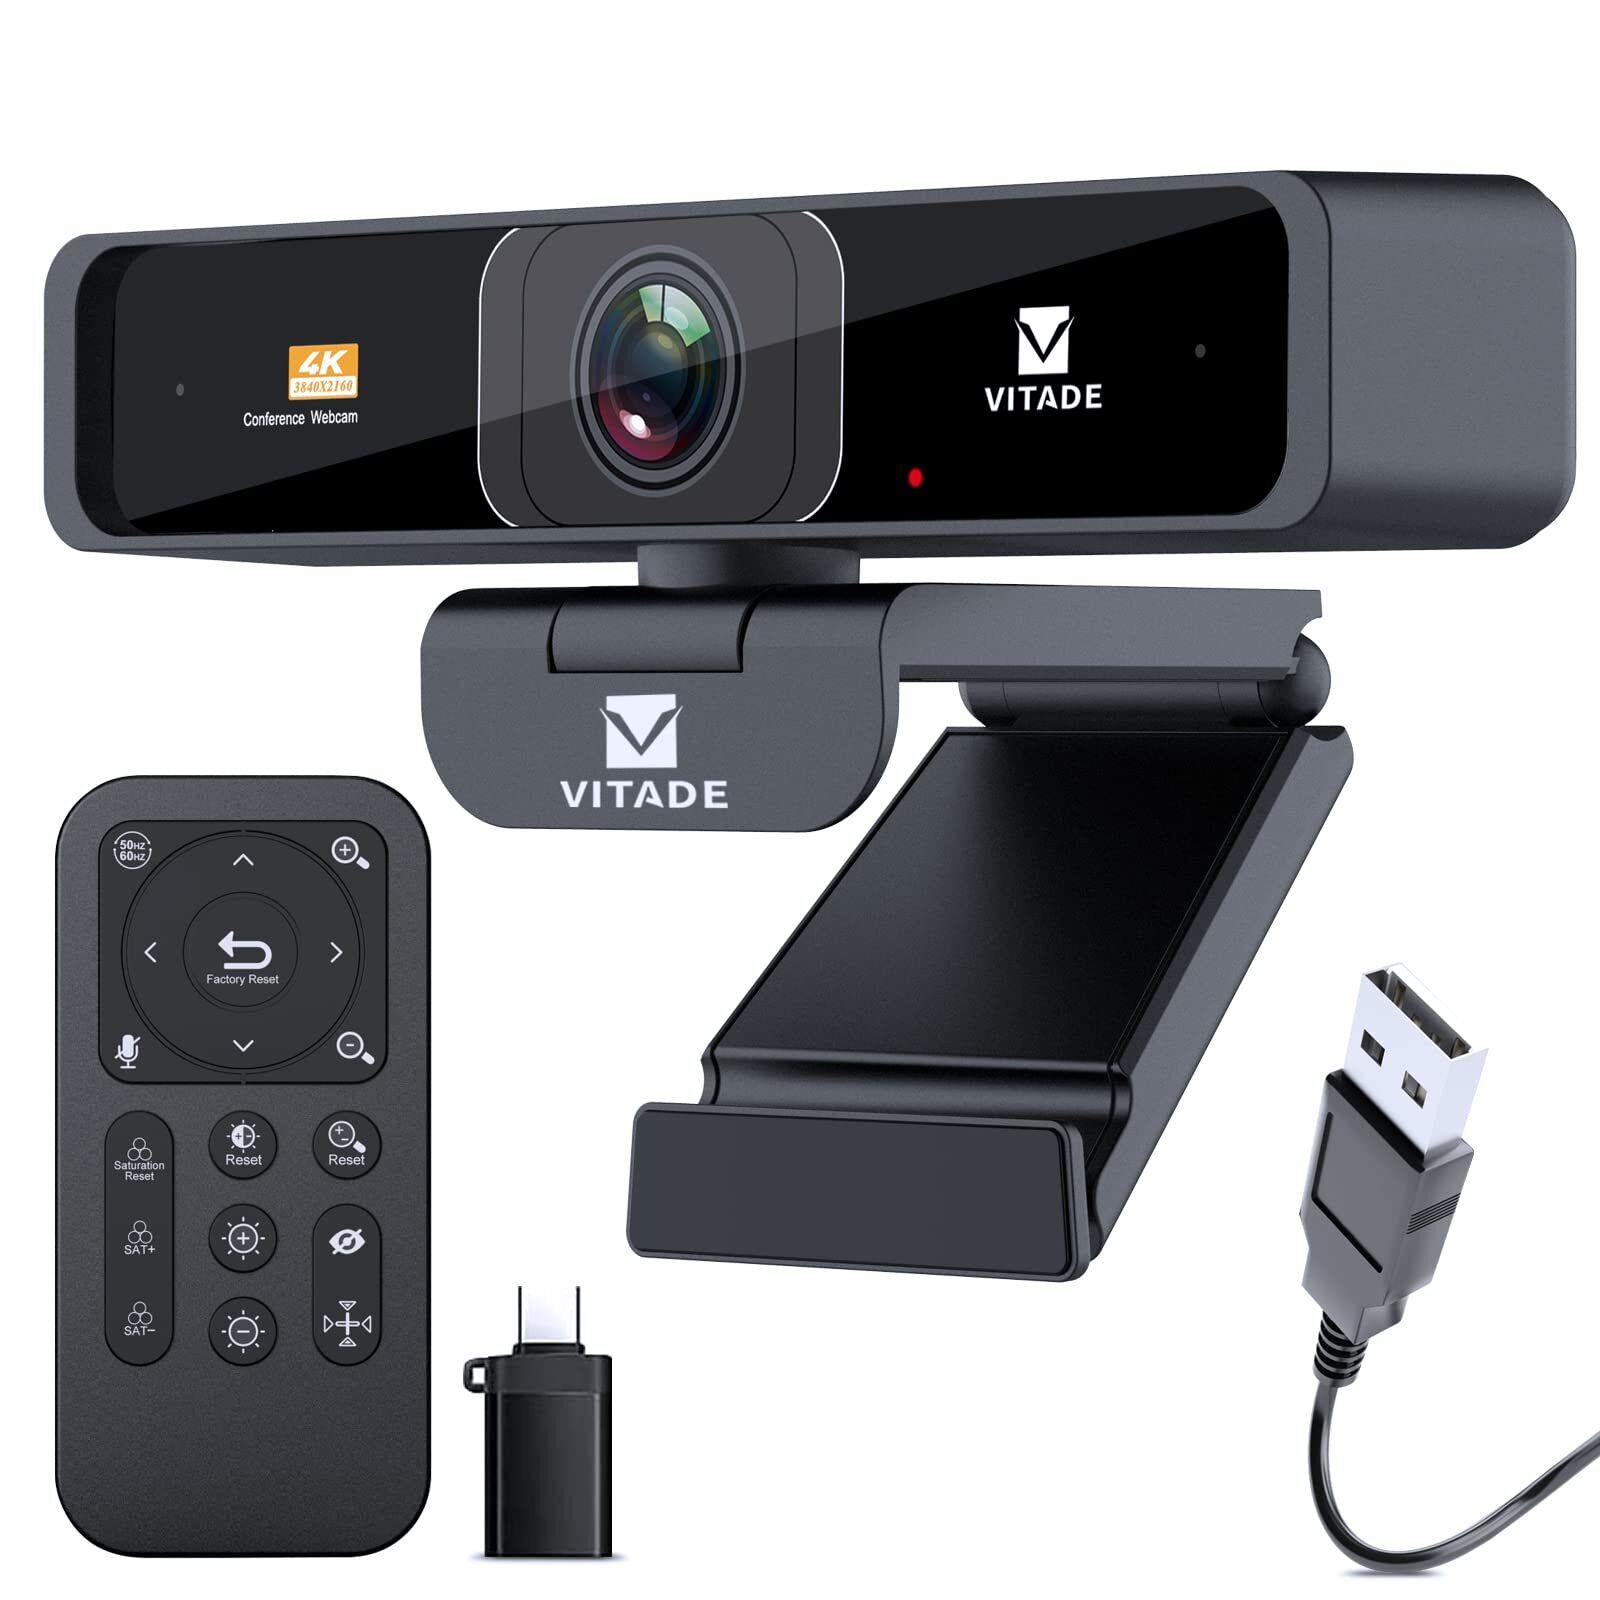 VITADE 4K Zoomable Webcam with Upgraded Remote Control, 8MP Sony Sensor Webca...